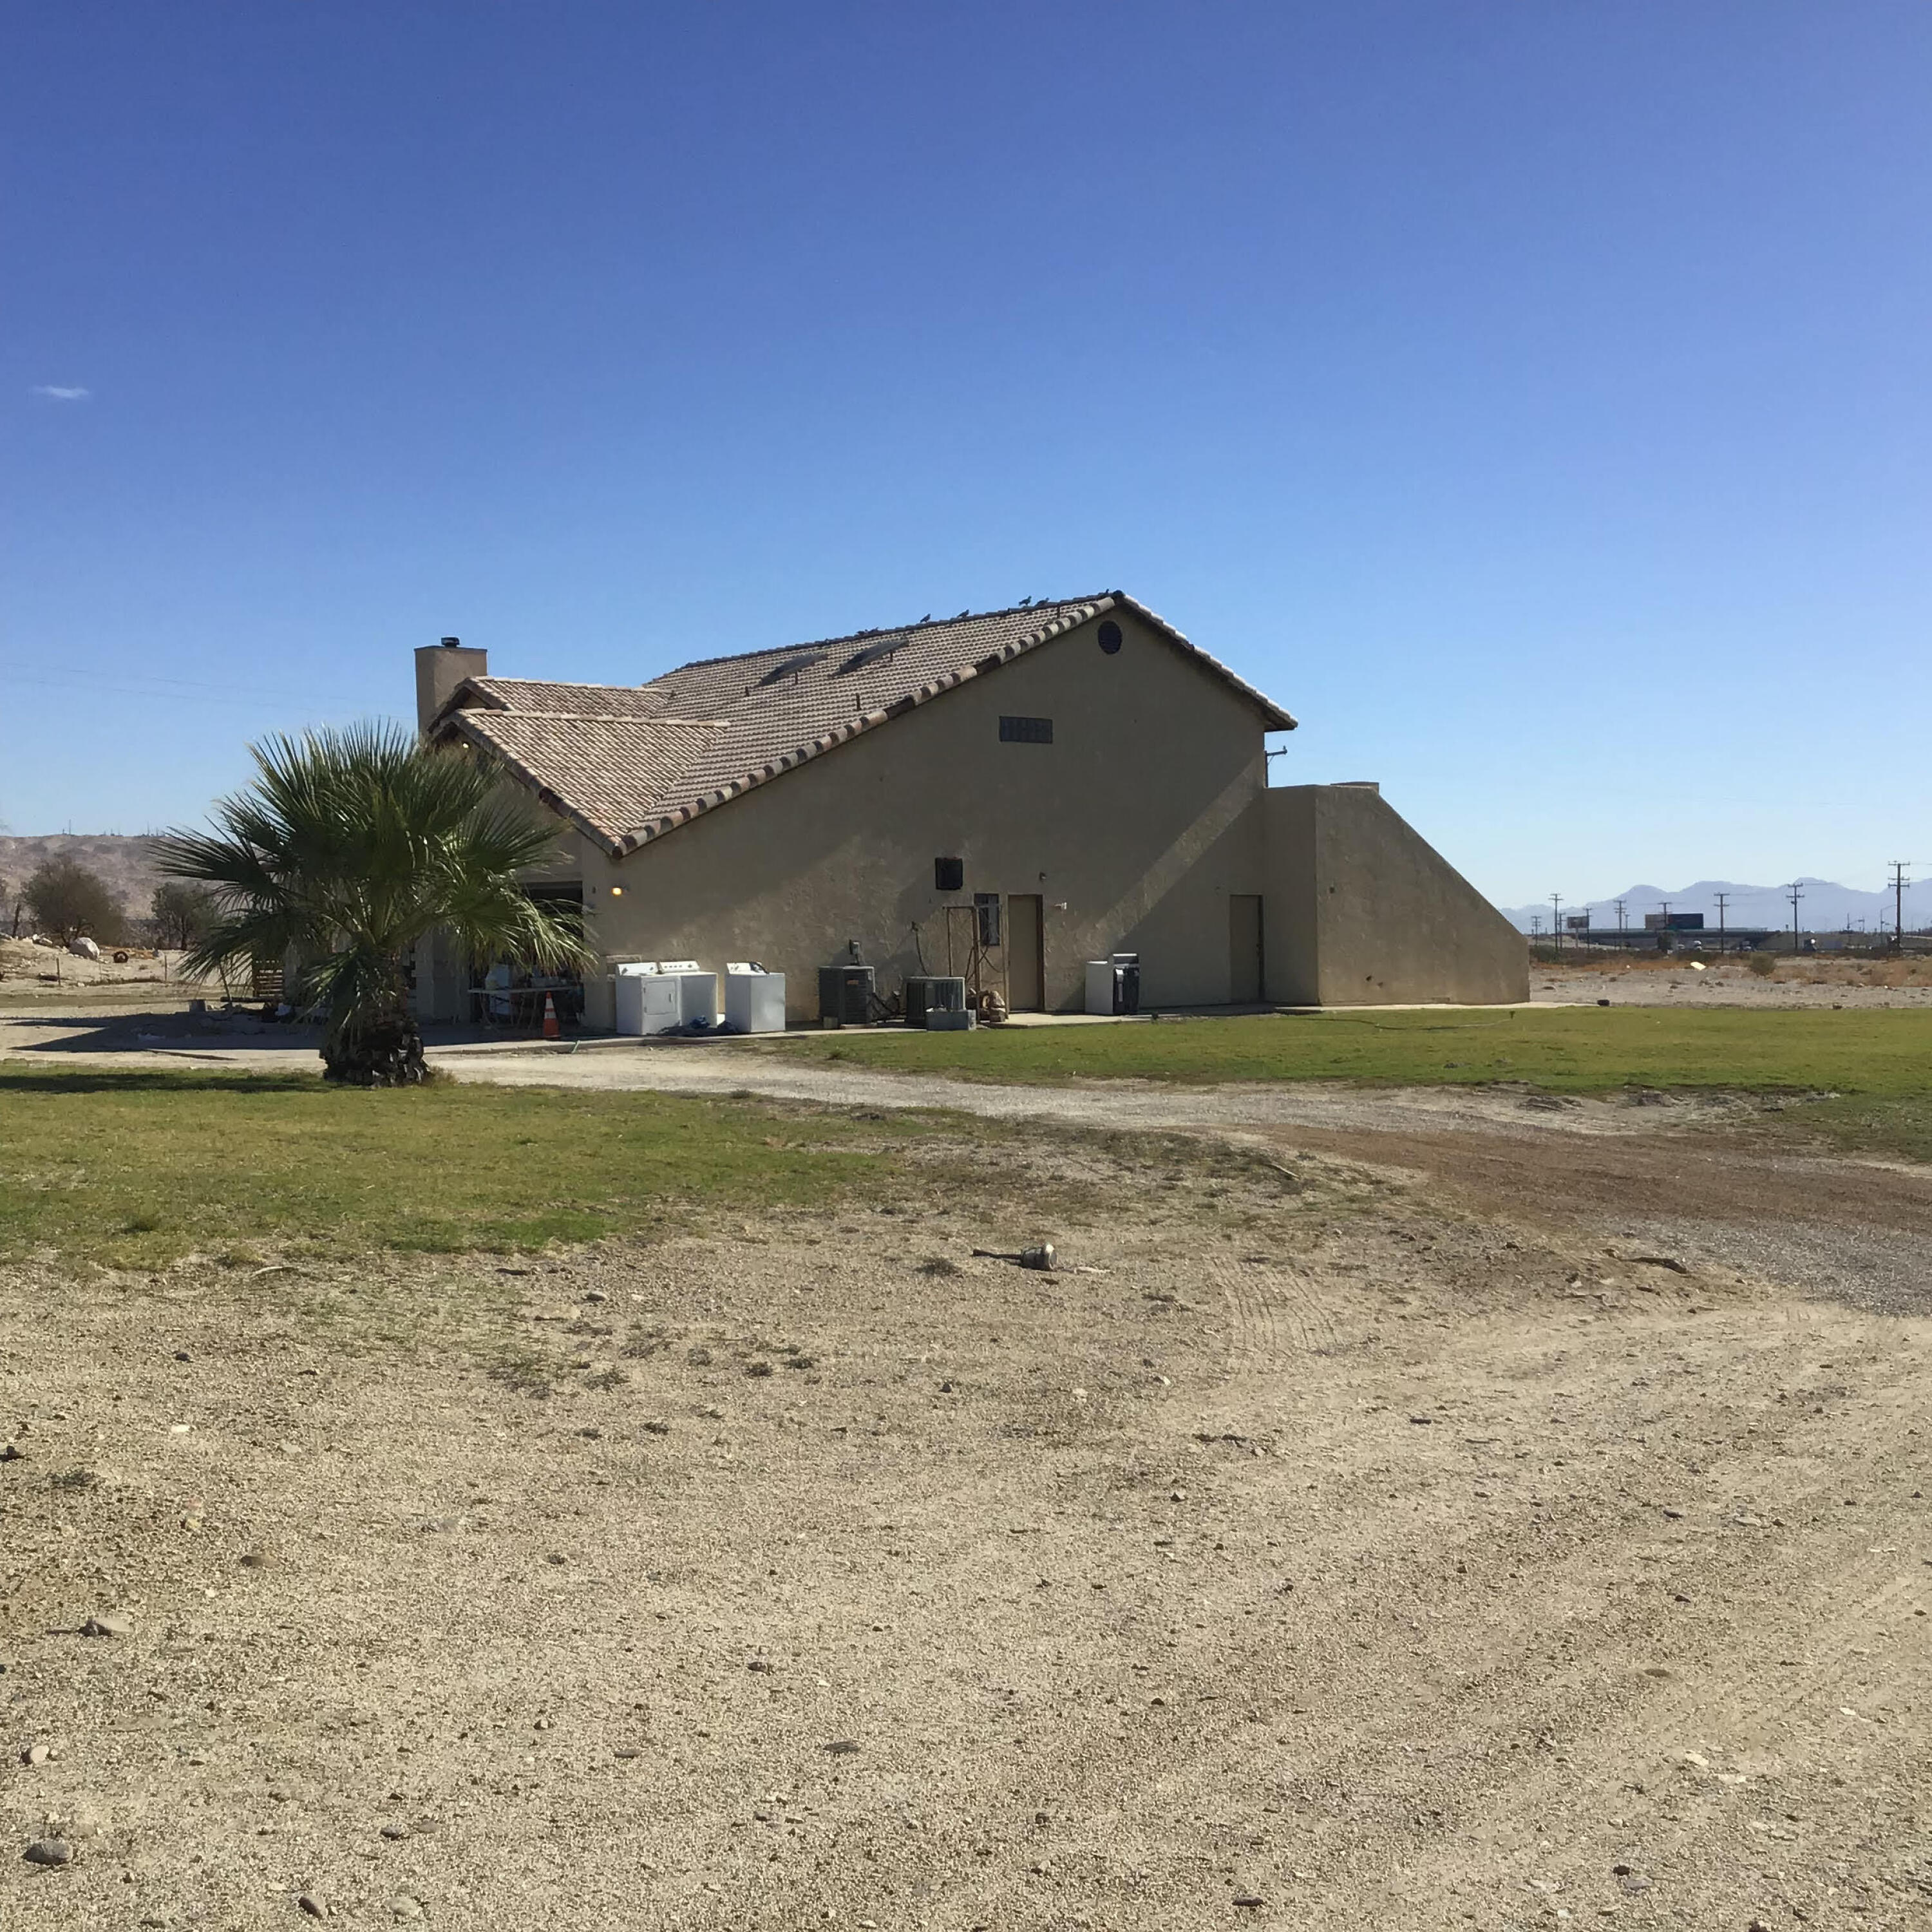 INVESTOR OPPORTUNITY! Large 4 bedroom 2 bath 2 story fixer with mountain views has endless potential. This home has tile flooring through out and carpet in hallways stairs and bedrooms, fireplace, spacious den/office area, double car garage, large patio space, RV parking and over 7.8 acres of land for investors to expand their your Cannabis Business in Desert Hot Springs The city of Desert Hot Springs is Pro-Development and Pro-Cannabis. This location is perfect with 10 freeway  frontage. Seller will consider holding a note for 2-5 years with $500K down and a reasonable interest rate. Minutes to Palm Springs for dining and shopping, Casino Morongo and Cabazon Outlets. Needs TLC!